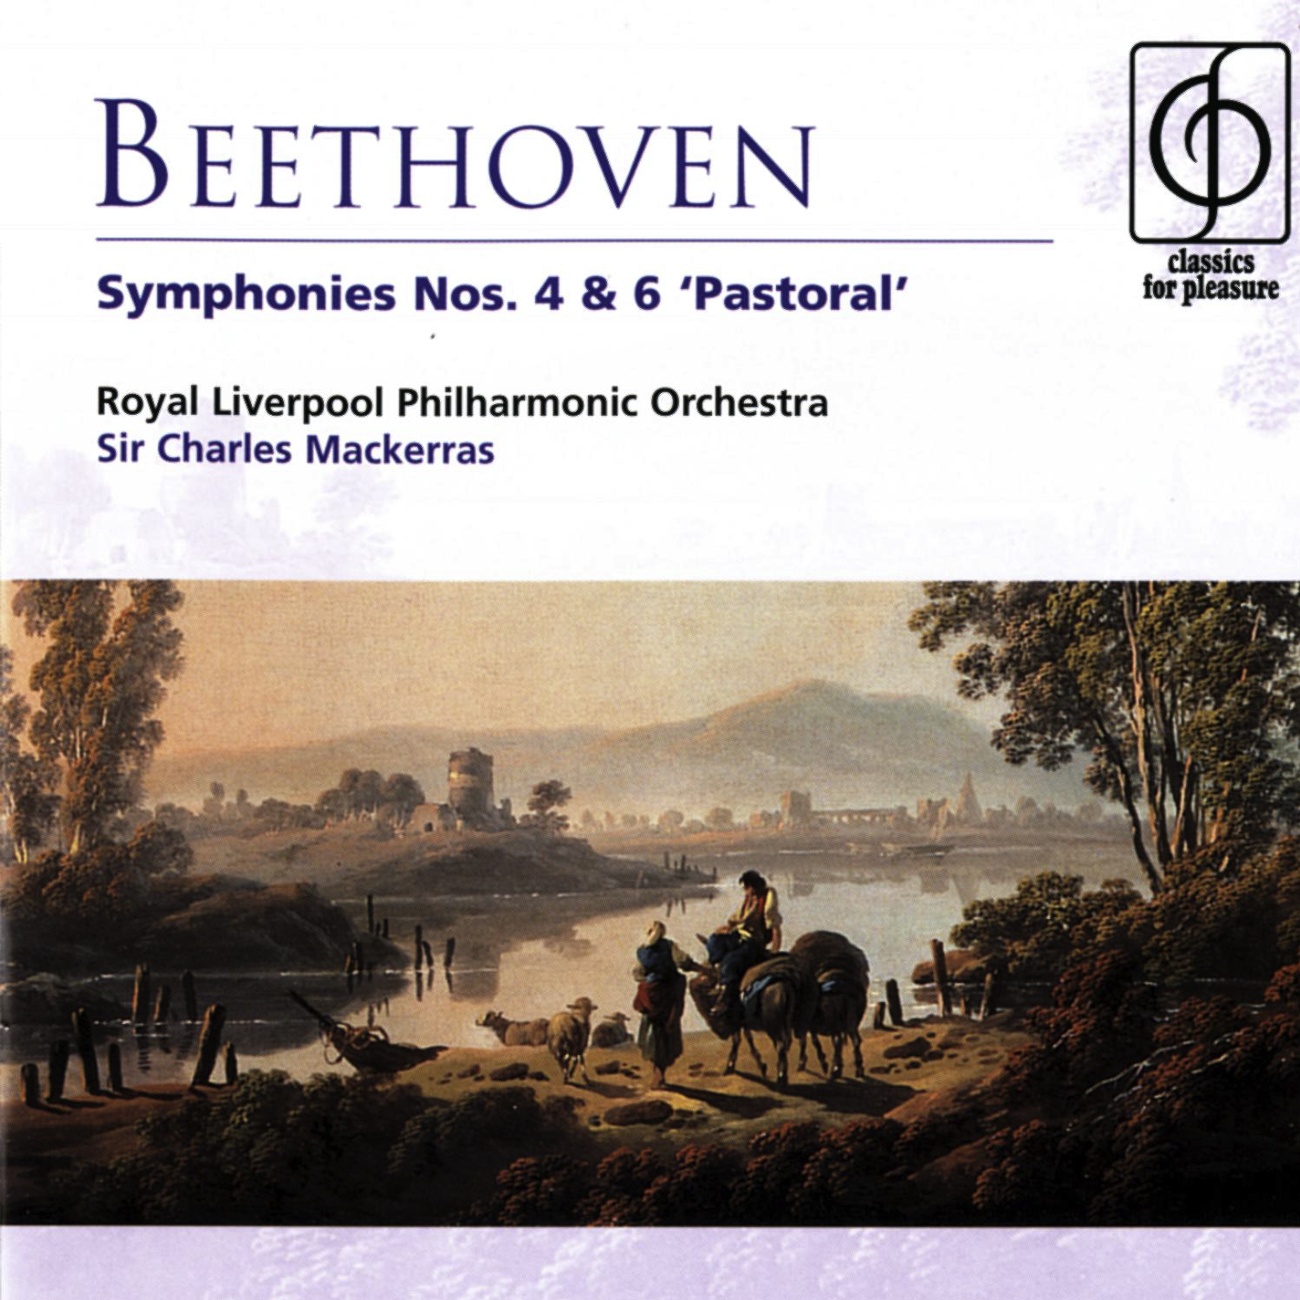 Symphony No. 6 in F 'Pastoral' Op. 68: I.       Pleasant, cheerful feelings awakened on arrival in the countryside (Allegro ma n